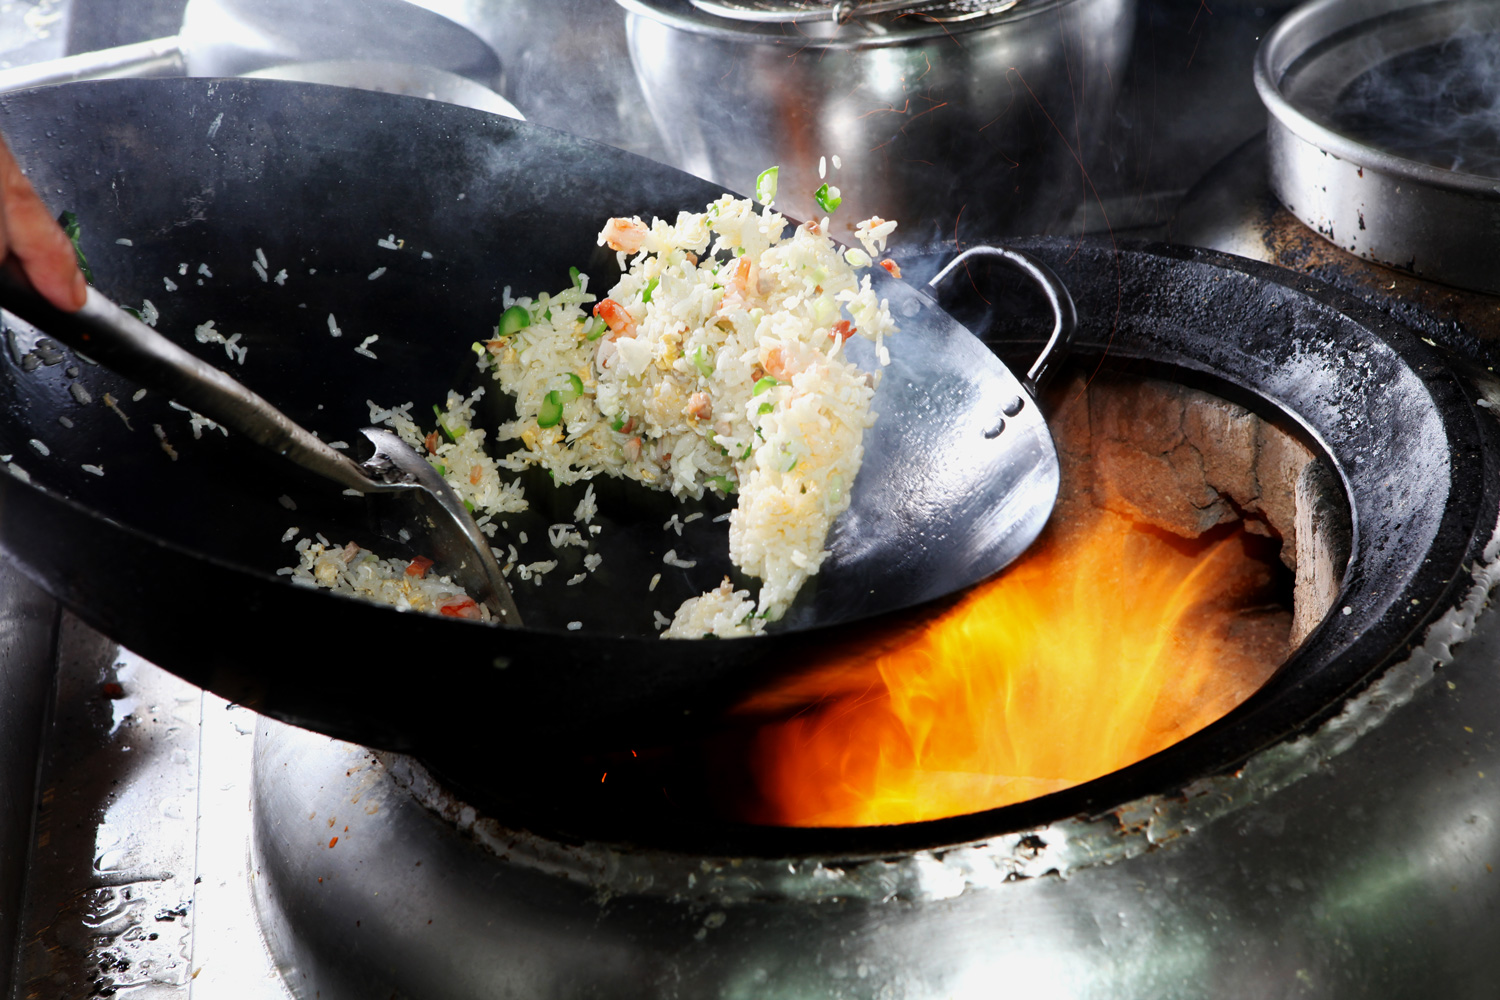 https://asianinspirations.com.au/wp-content/uploads/2019/07/Cooking-Fried-Rice.jpg